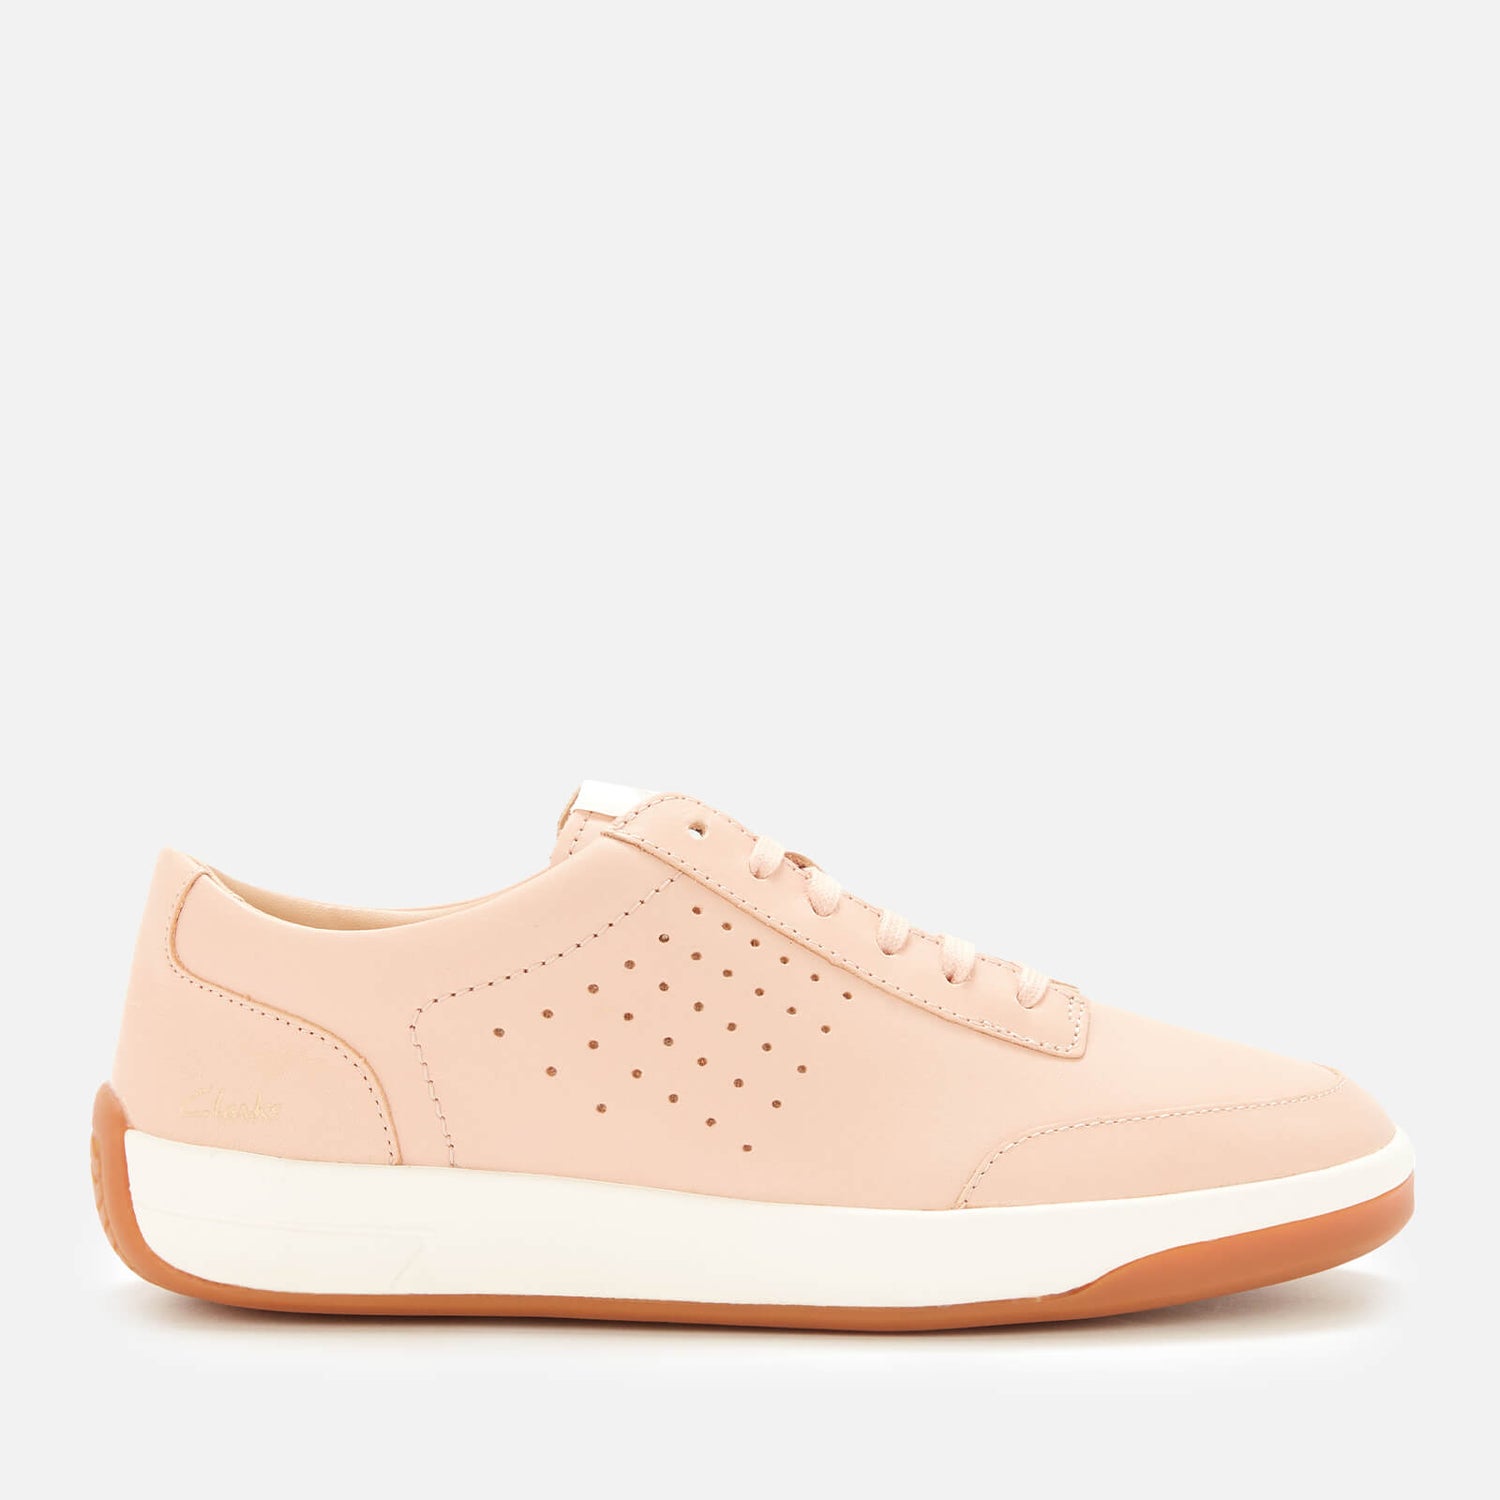 Clarks Women's Hero Air Lace Low Top Trainers - Light Pink